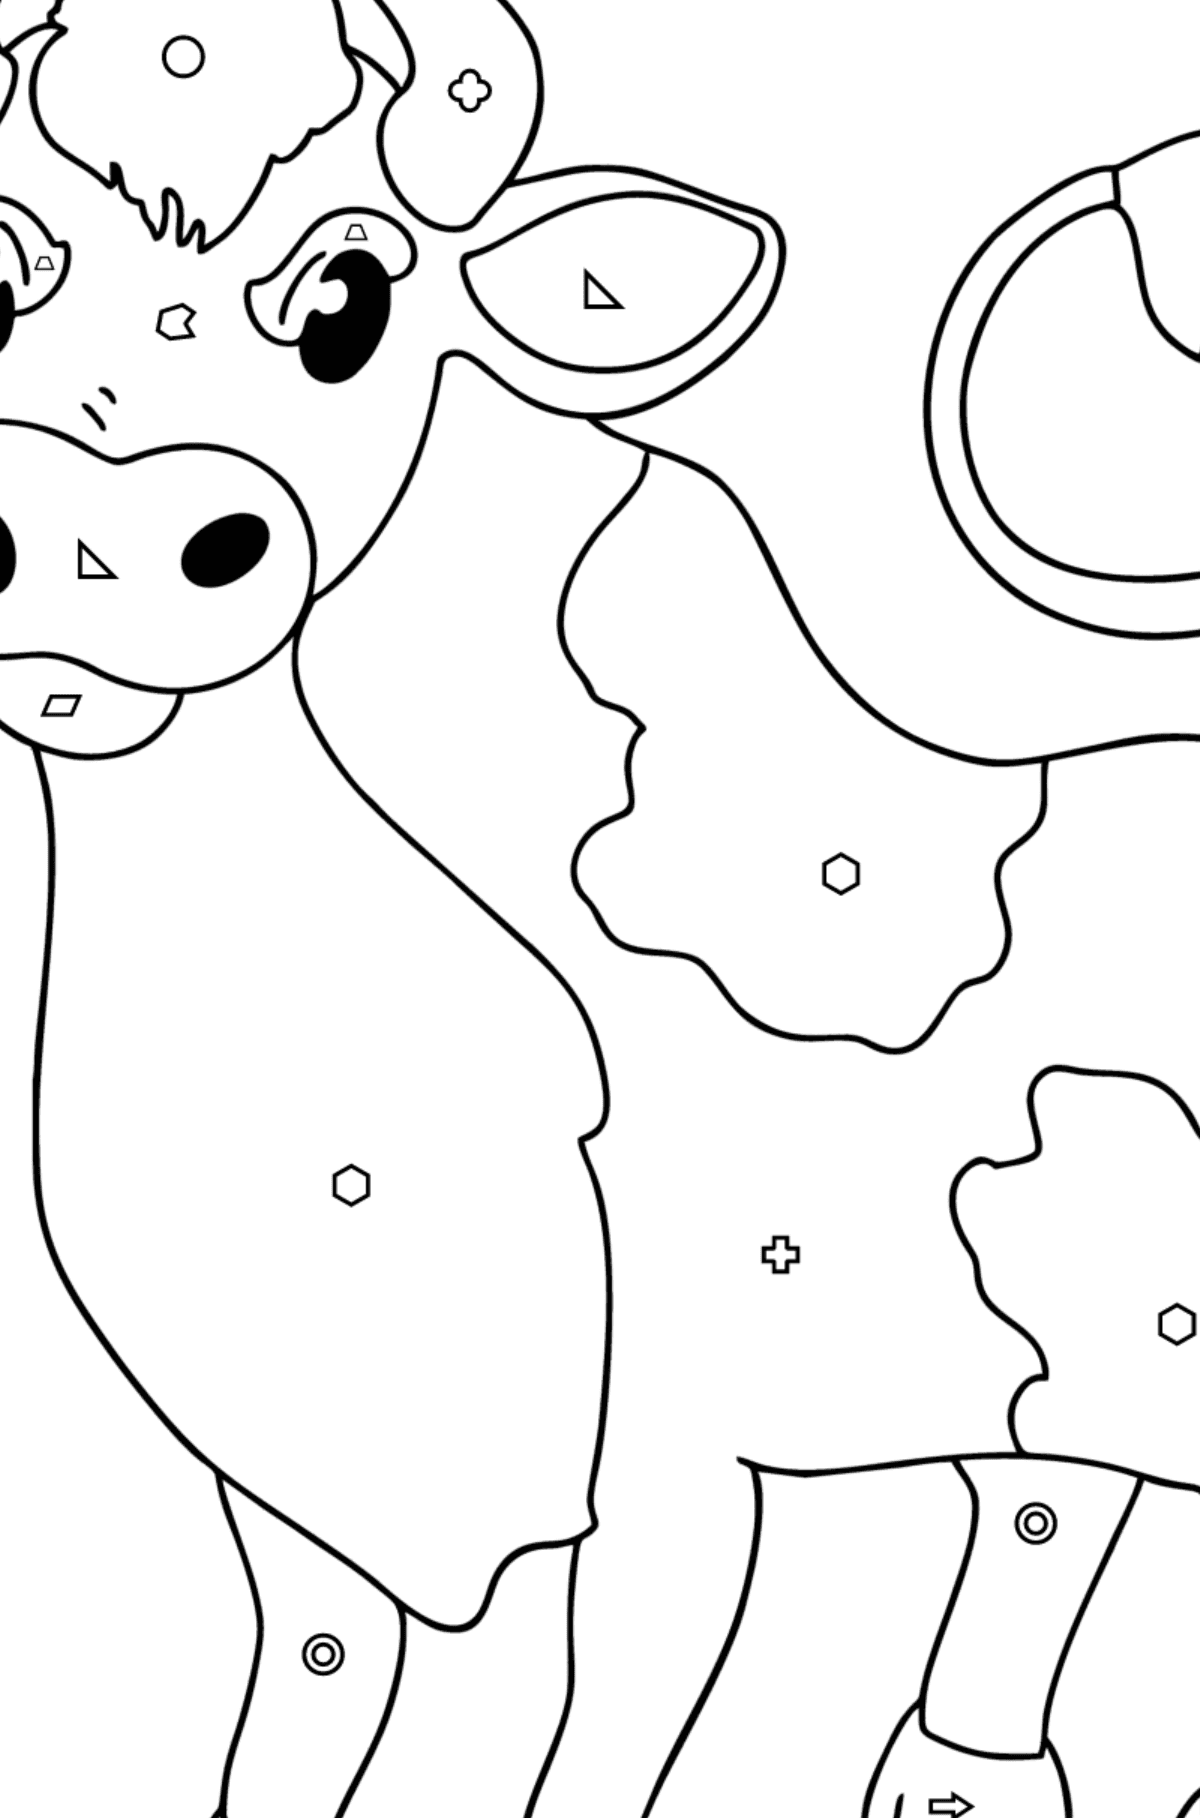 Gray bull coloring page - Coloring by Geometric Shapes for Kids